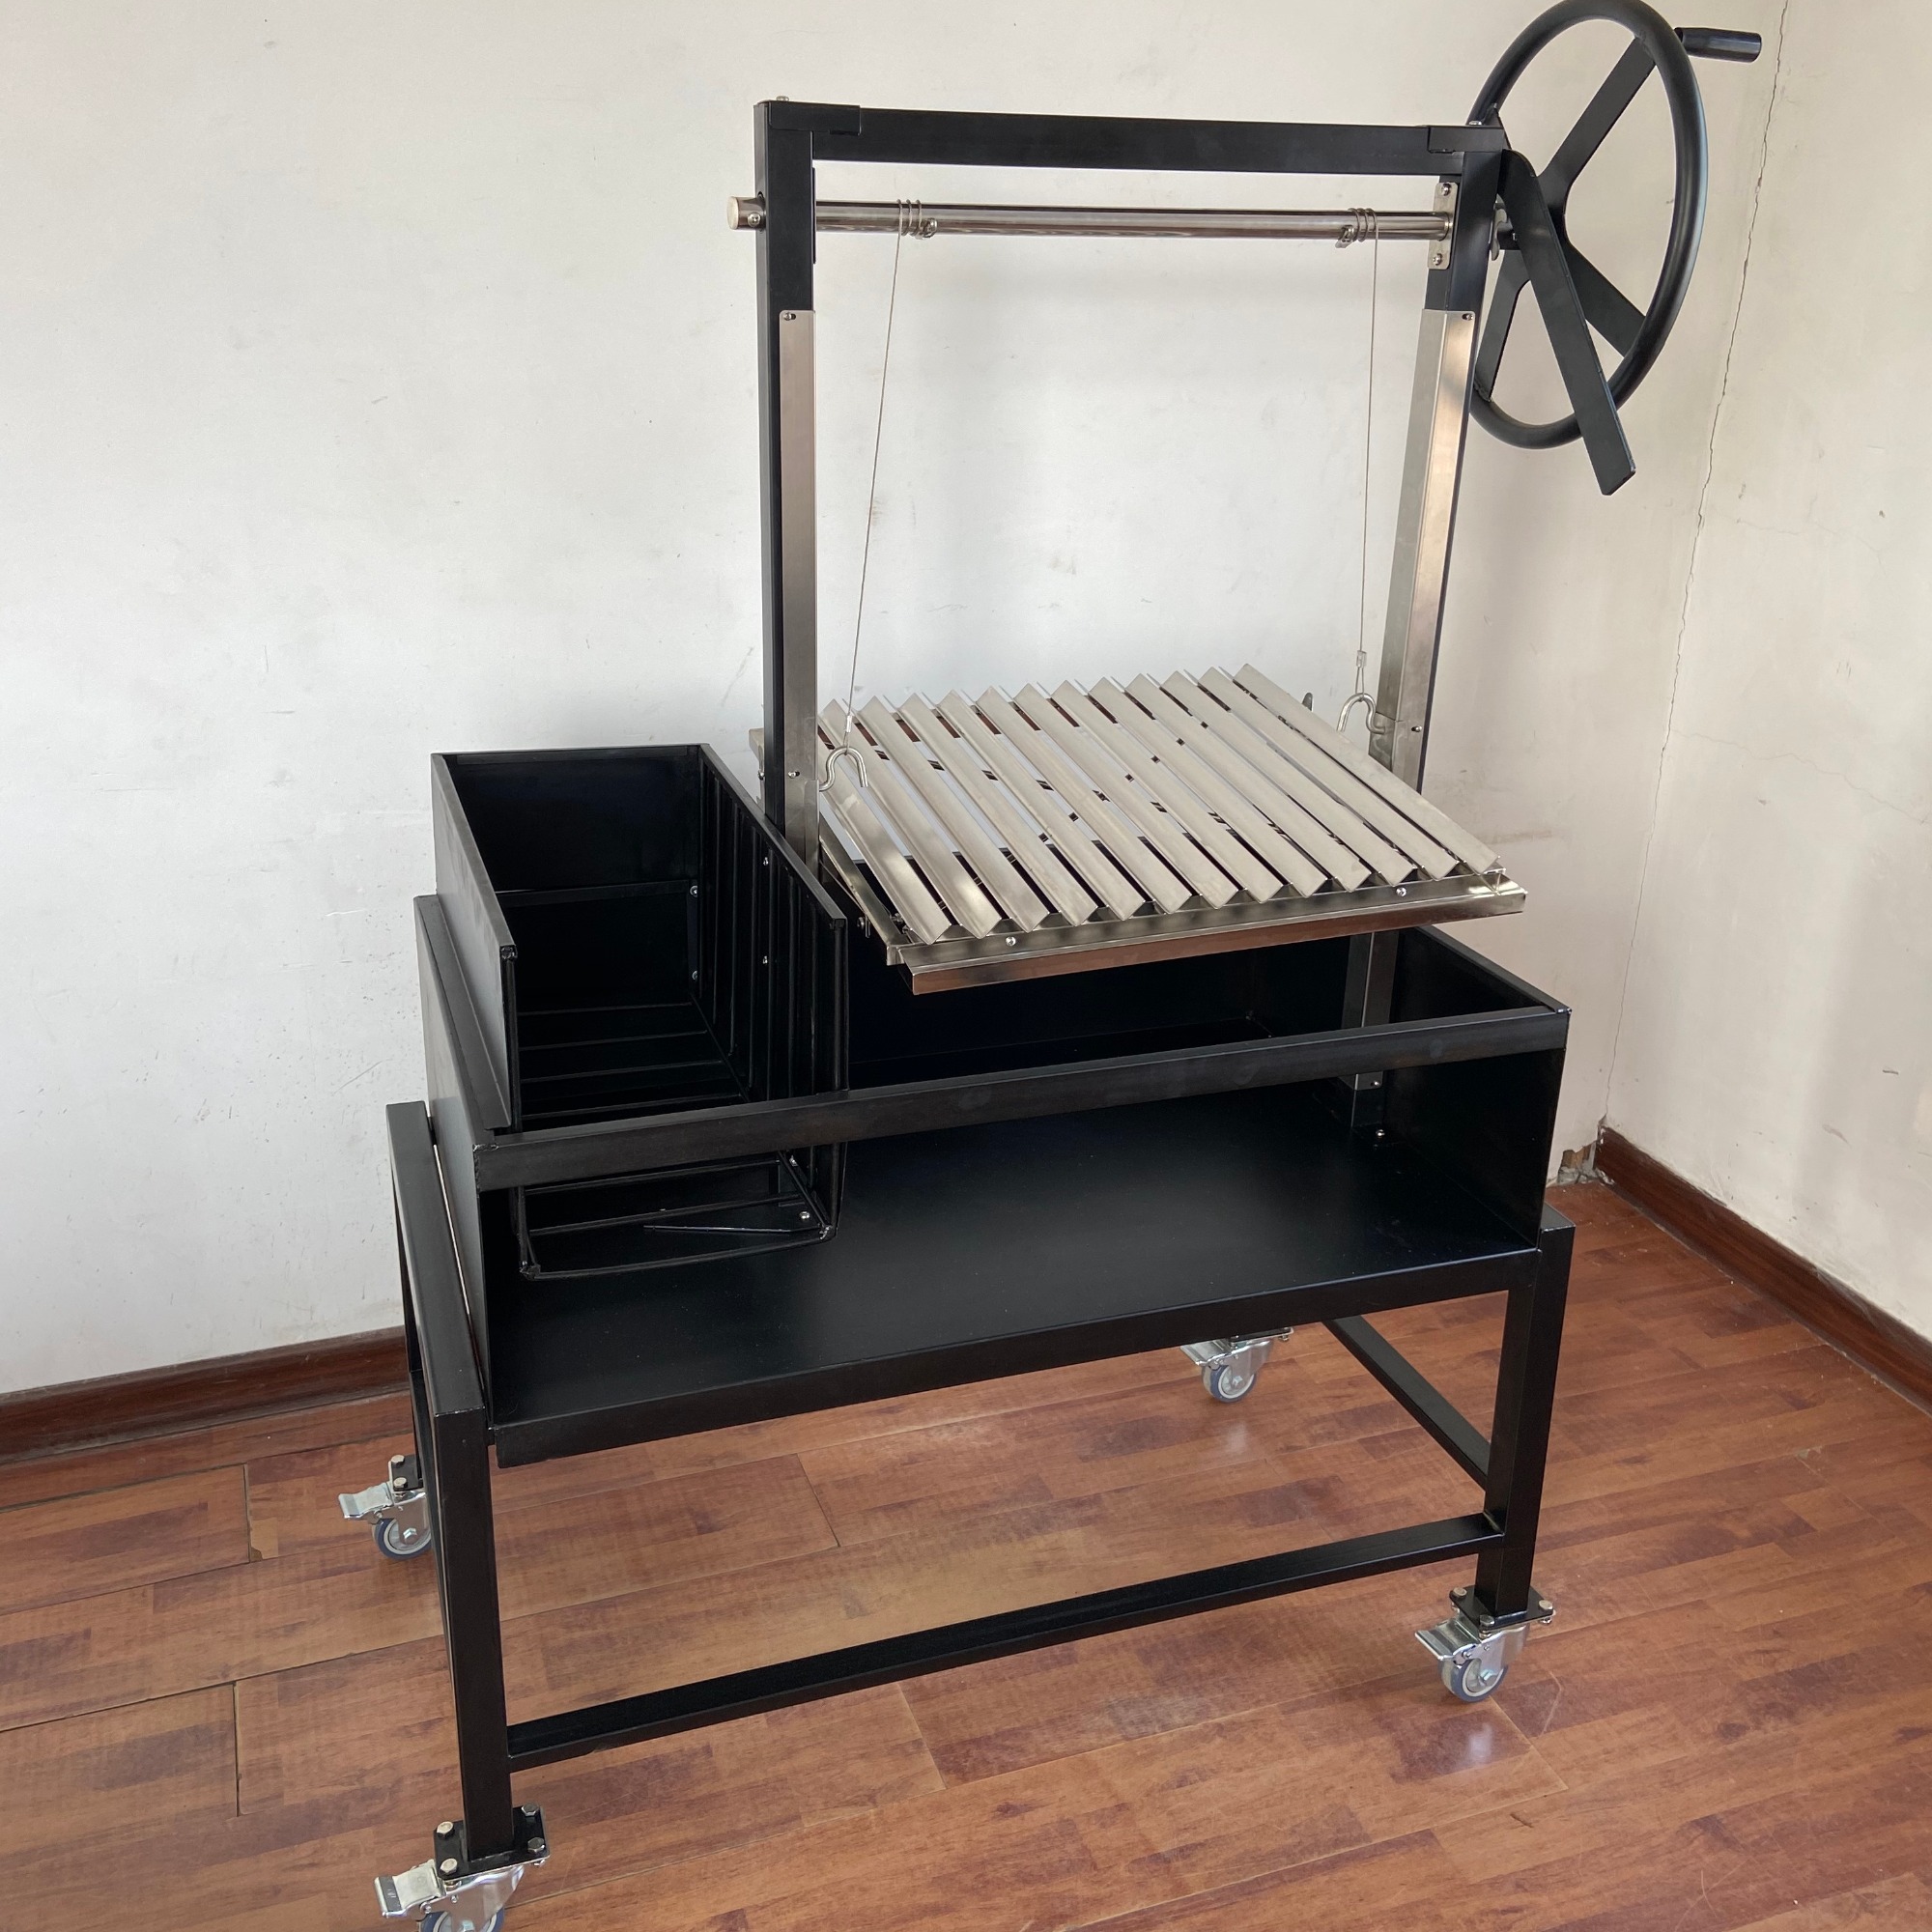 Power Coating Argentine Parrilla BBQ Barbecue Grill